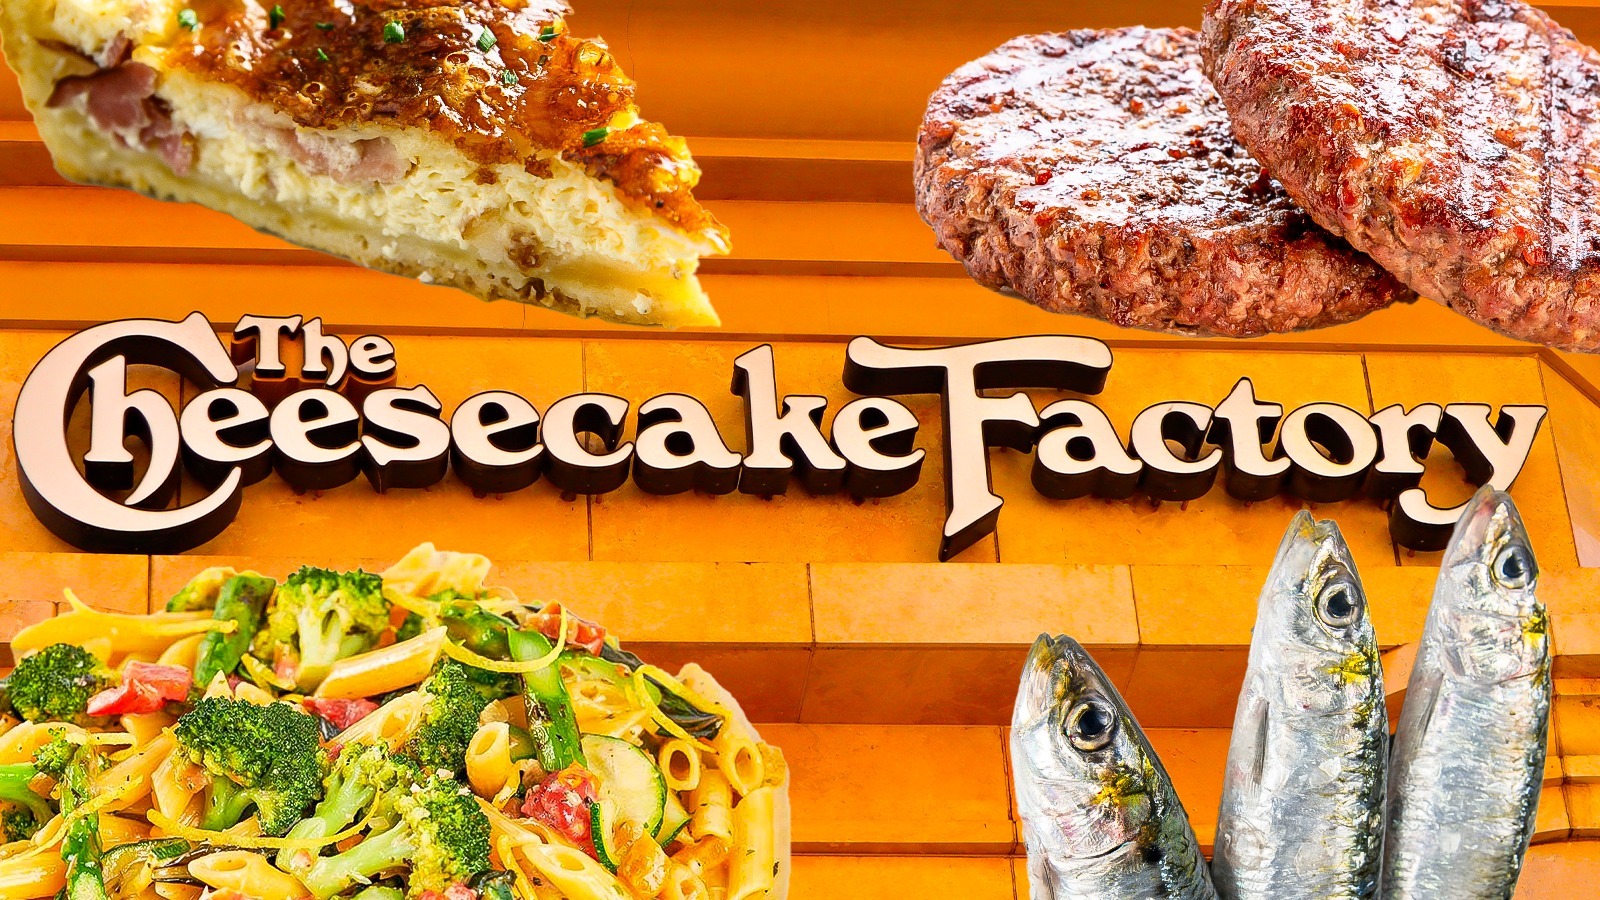 Is Cheesecake Factory Dining Room Open